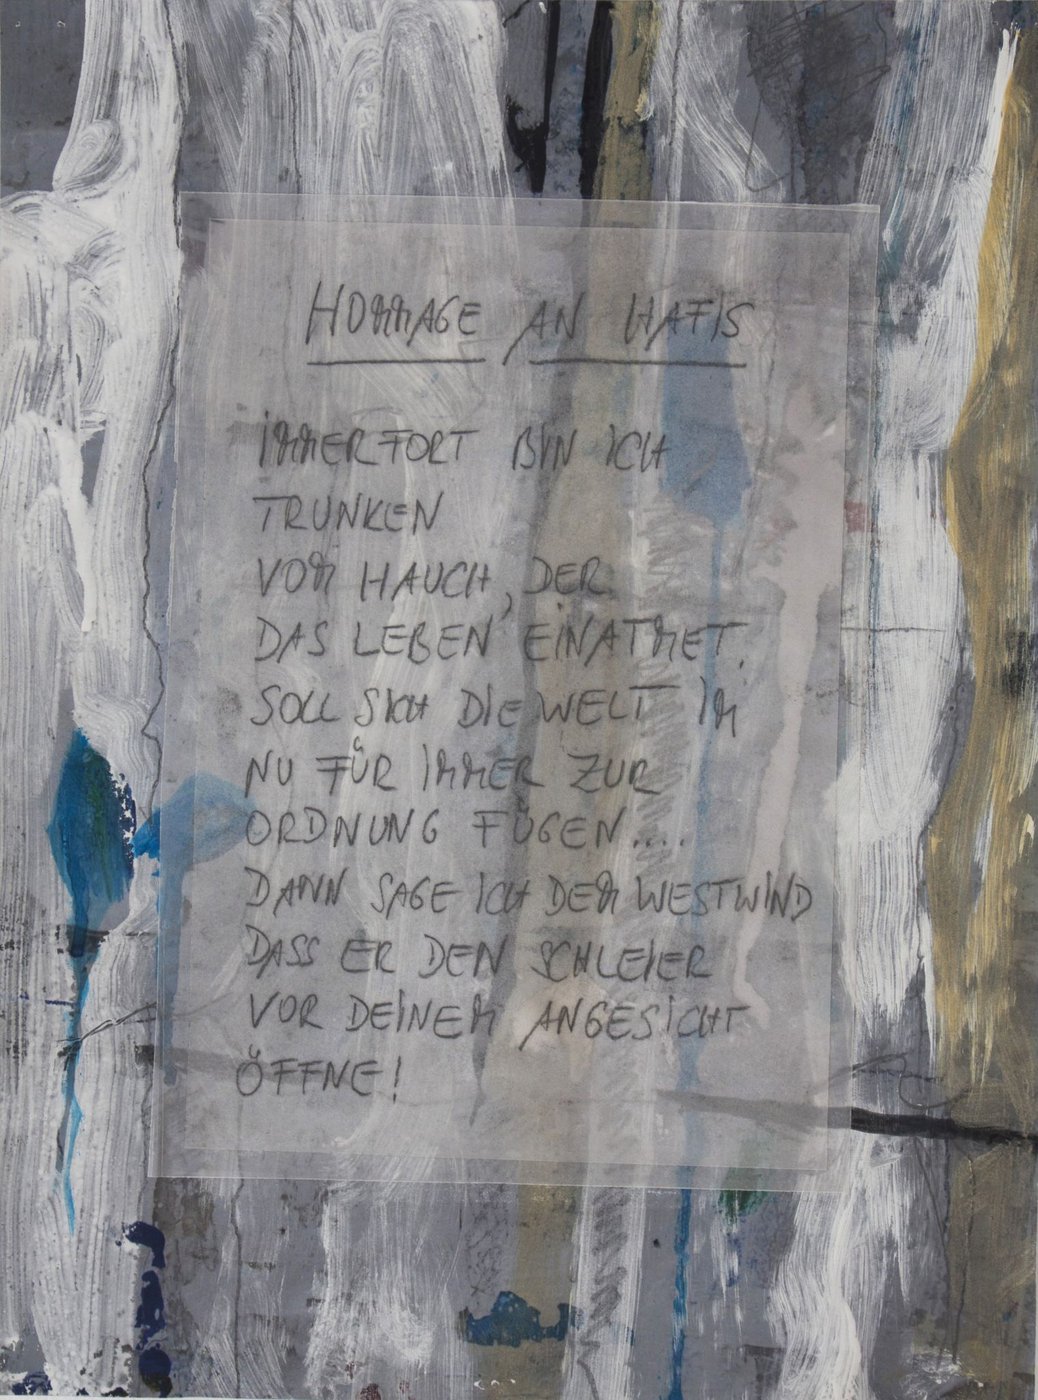 "Homage to Hafis" is a portrait collage work in mixed media with abstract acrylic painting, the color white dominates. The text reads: "All the time I am drunk of the breath that breathes life. Should the world in an instant forever bring itself to order … Then tell the west wind to pull the veil on your face away!"